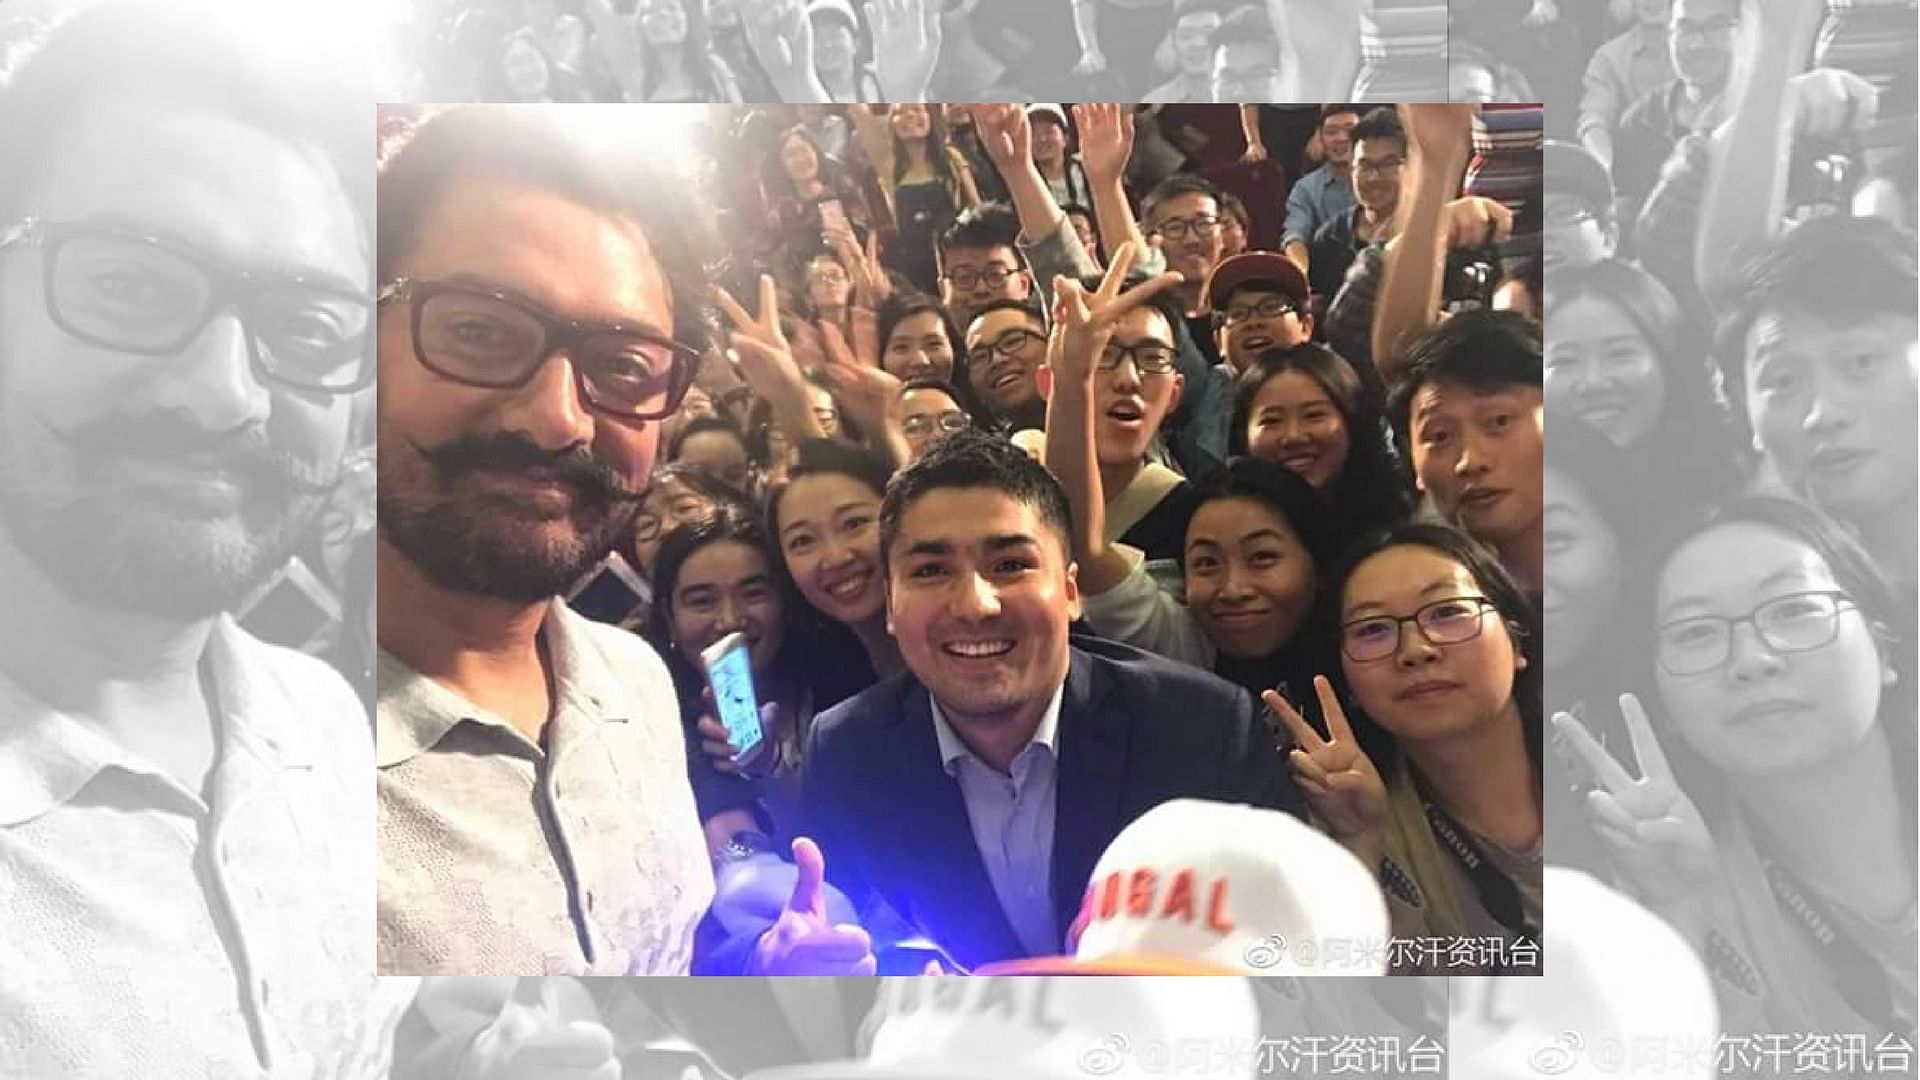 Aamir Khan clicks a selfie with his Chinese fans. (Photo courtesy: Twitter)